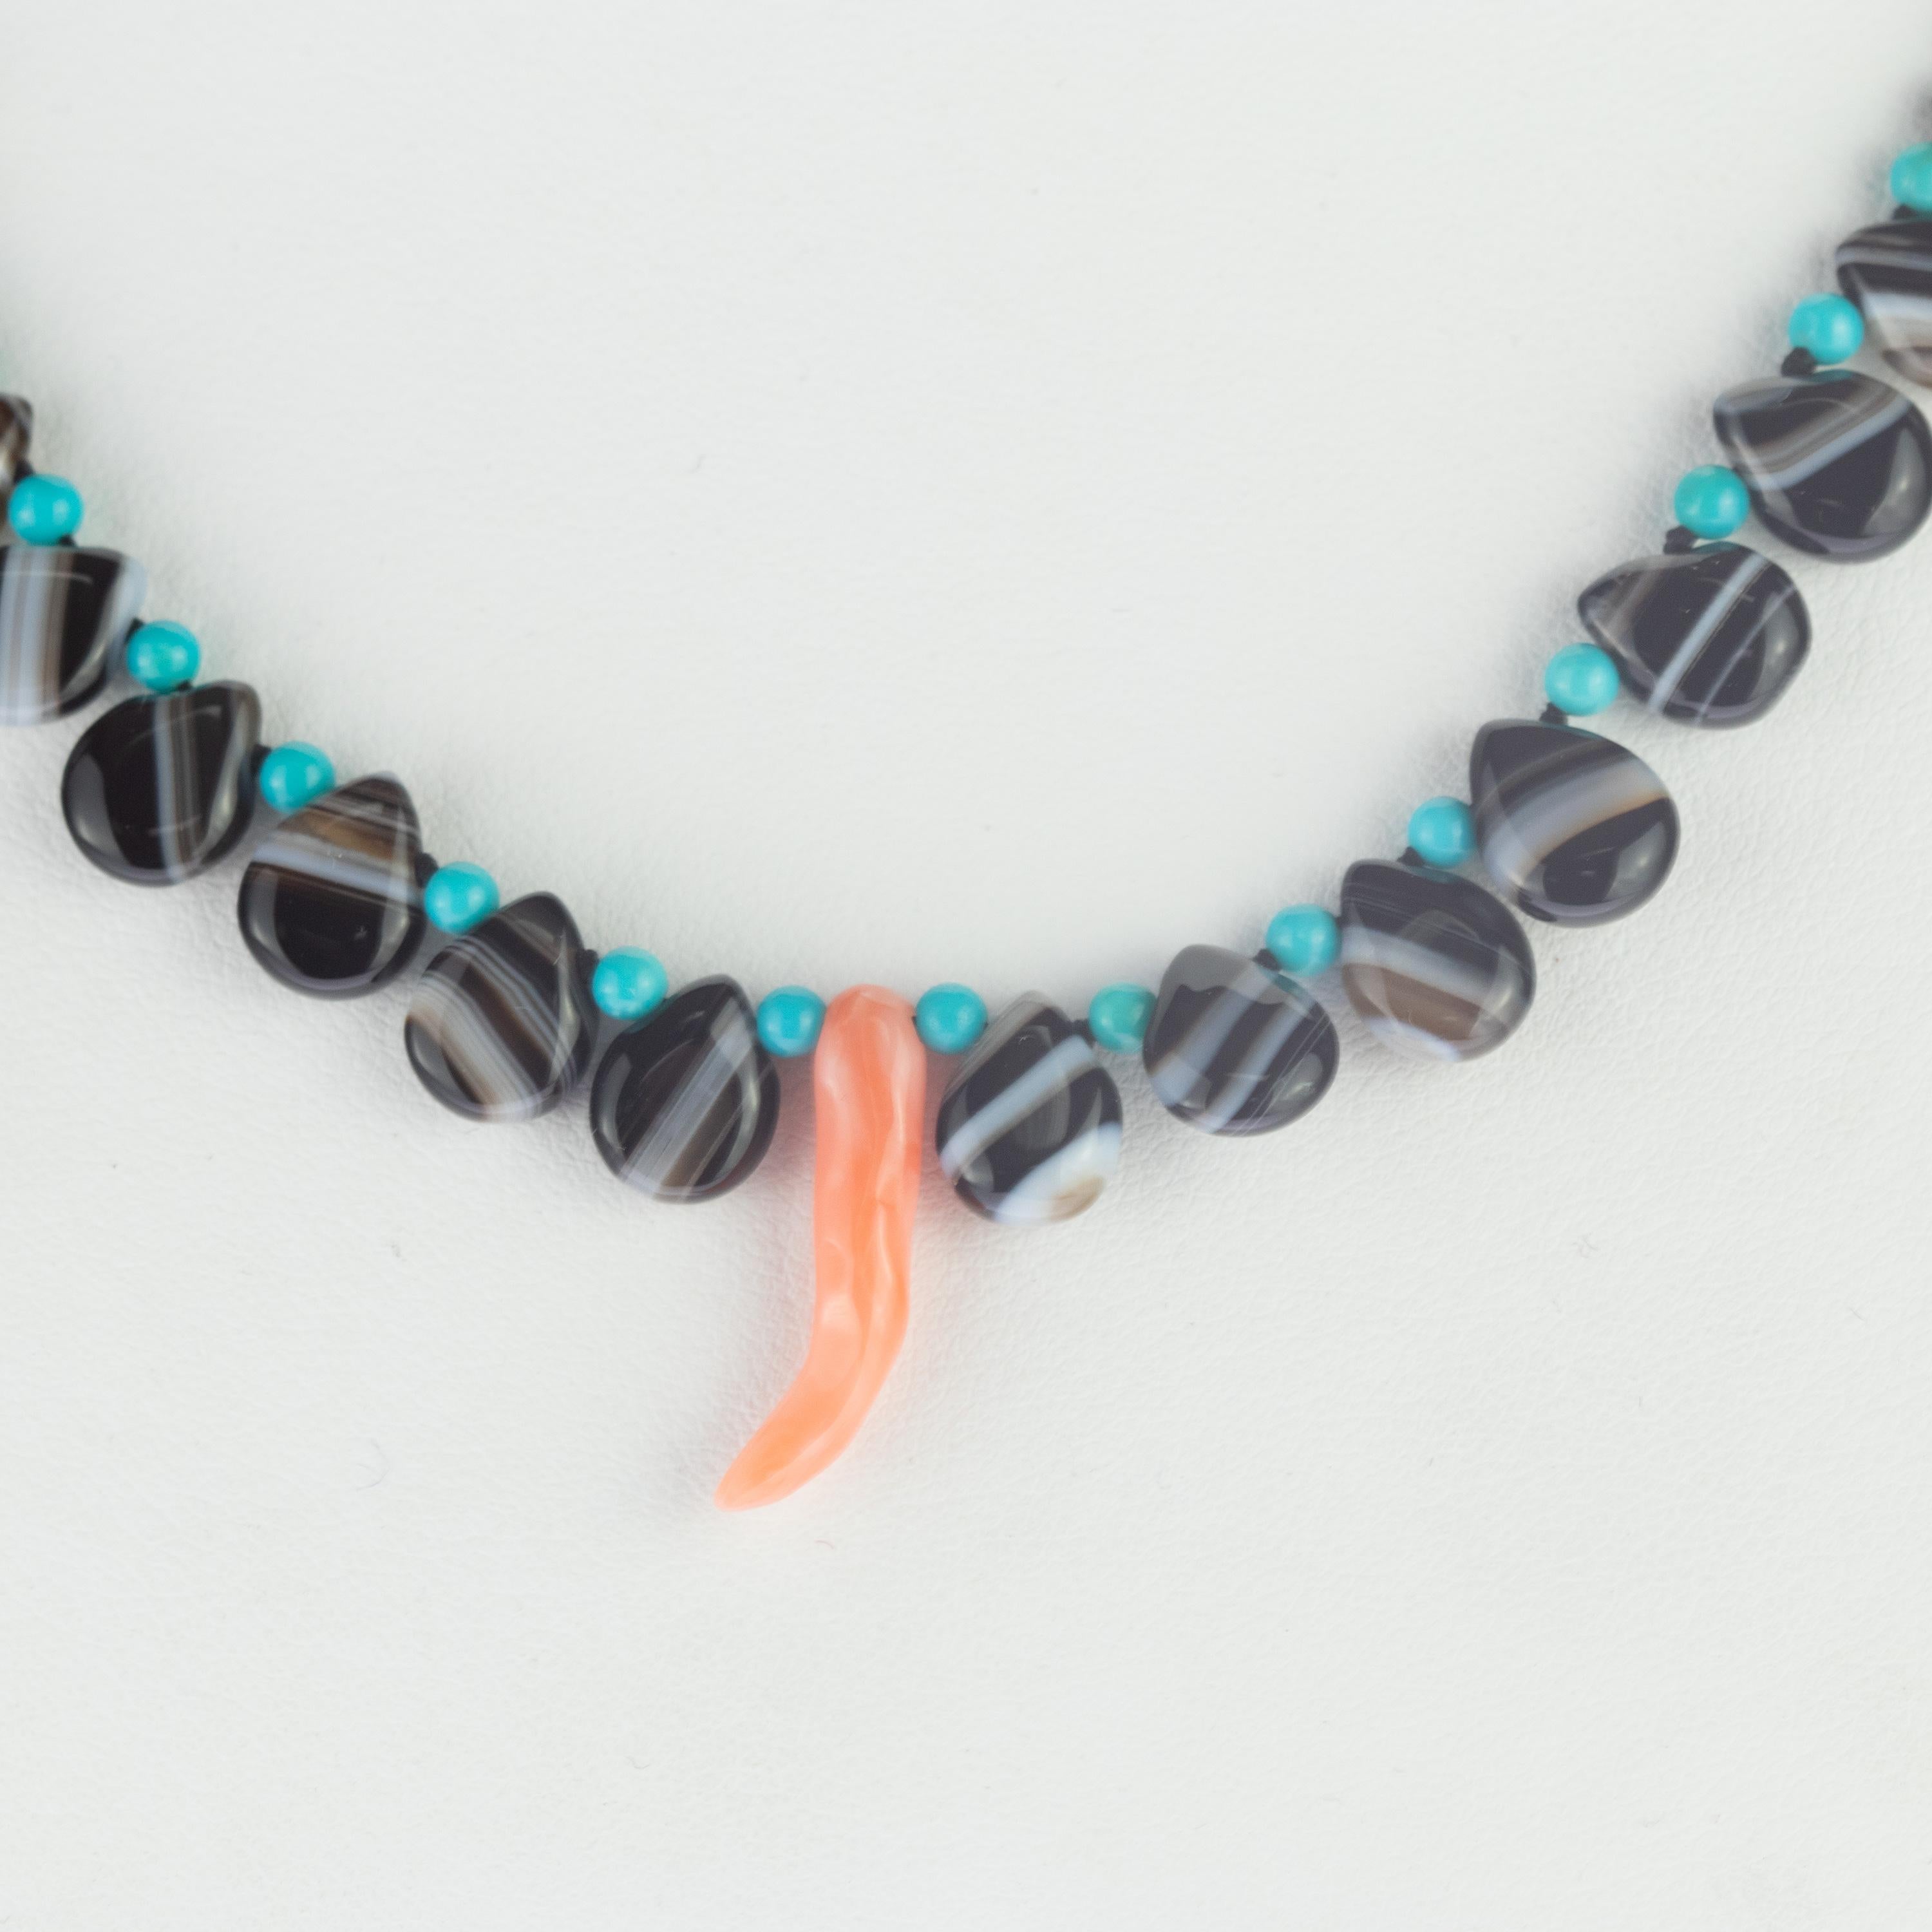 Mixed Cut Black Agate Turquoise Horn Red Coral Pendant Handmade Chic Boho Beaded Necklace For Sale